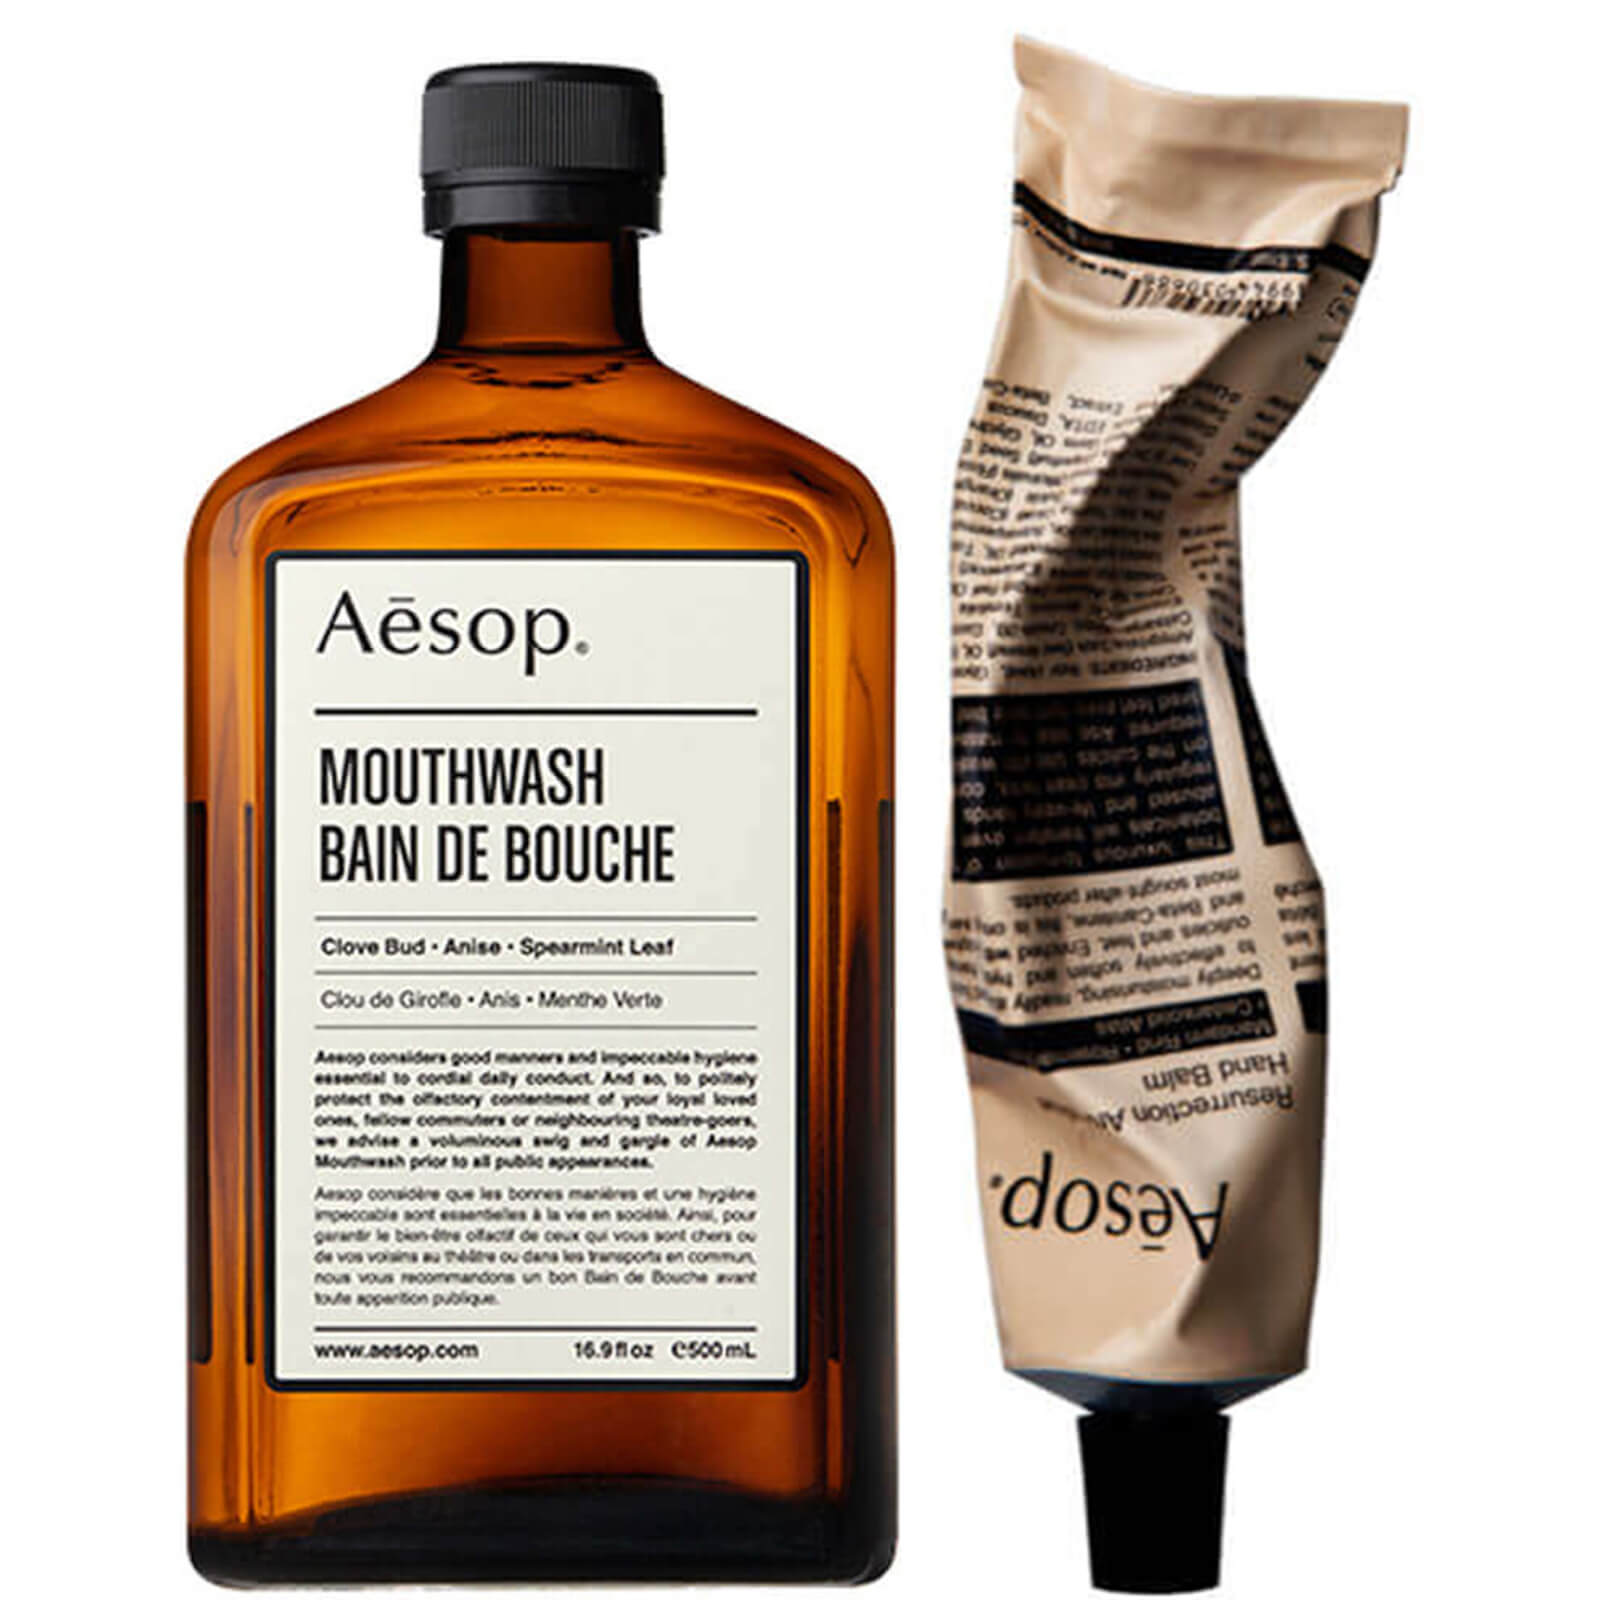 Aesop Hand Balm and Mouthwash Duo (Worth £38.00)